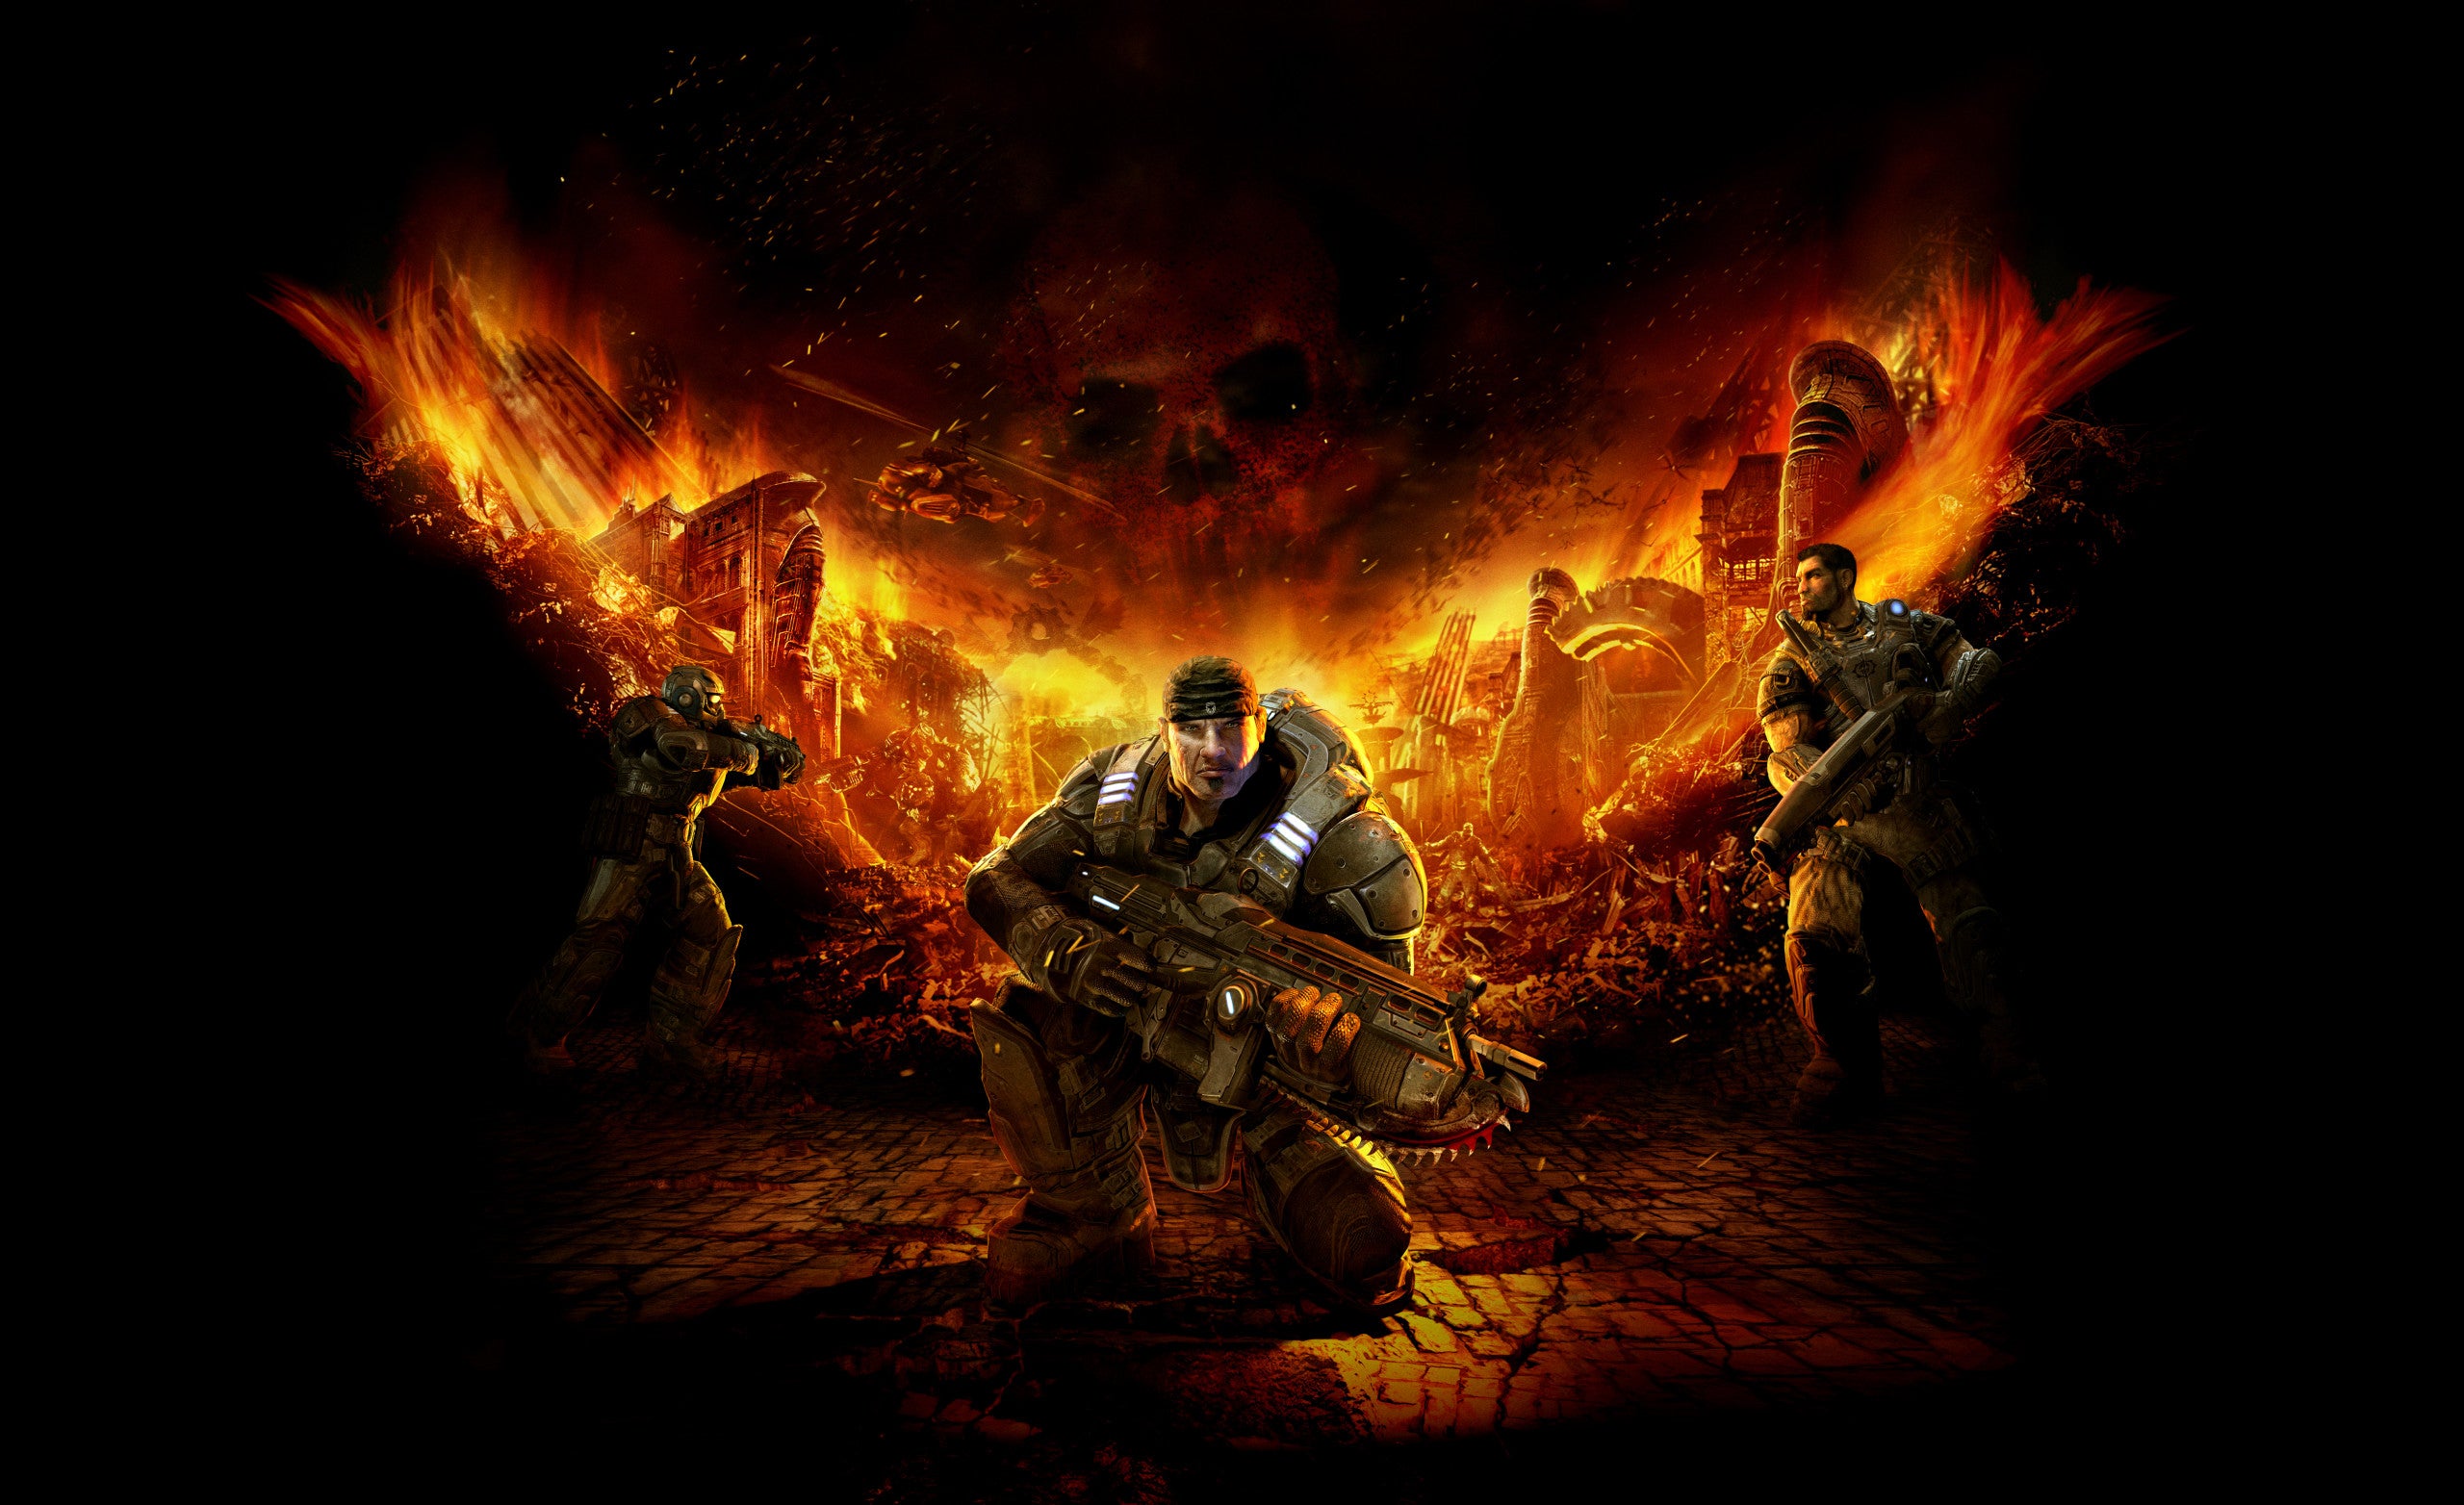 Image for Gears of War to get Netflix adaptations | News-in-brief